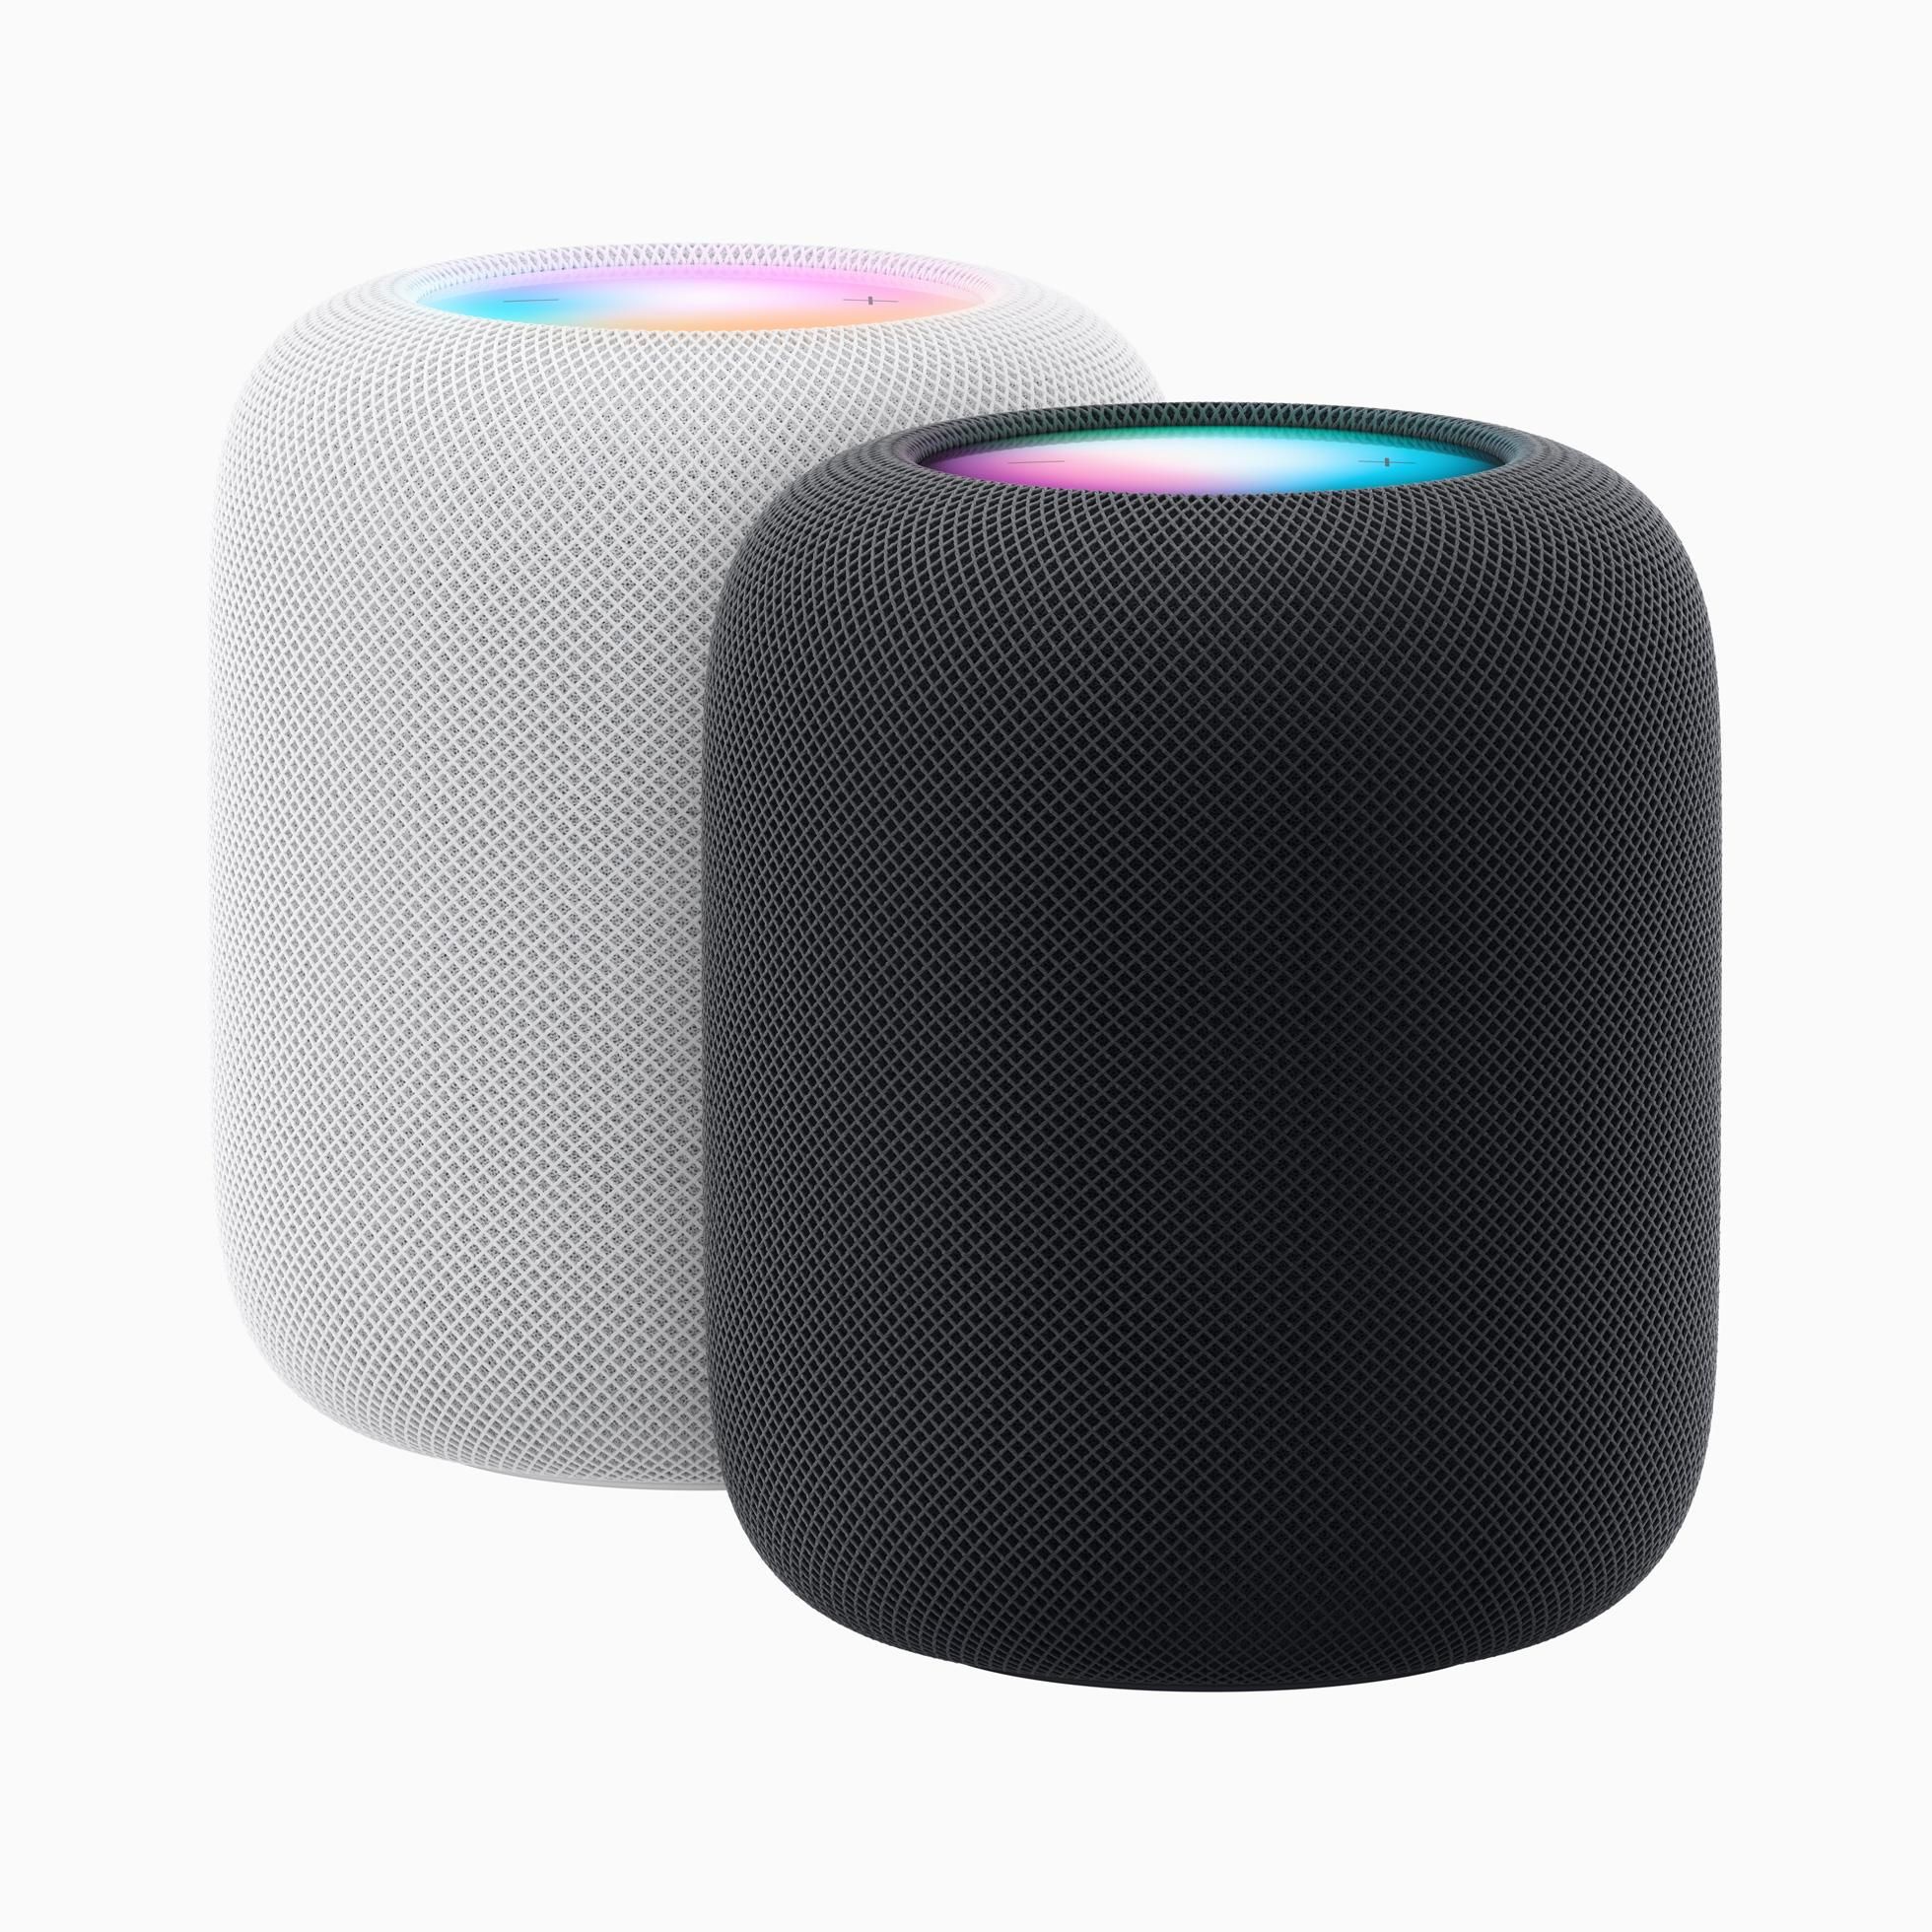 What you need to know about Apple HomePod 2 Gen Smart Speaker 